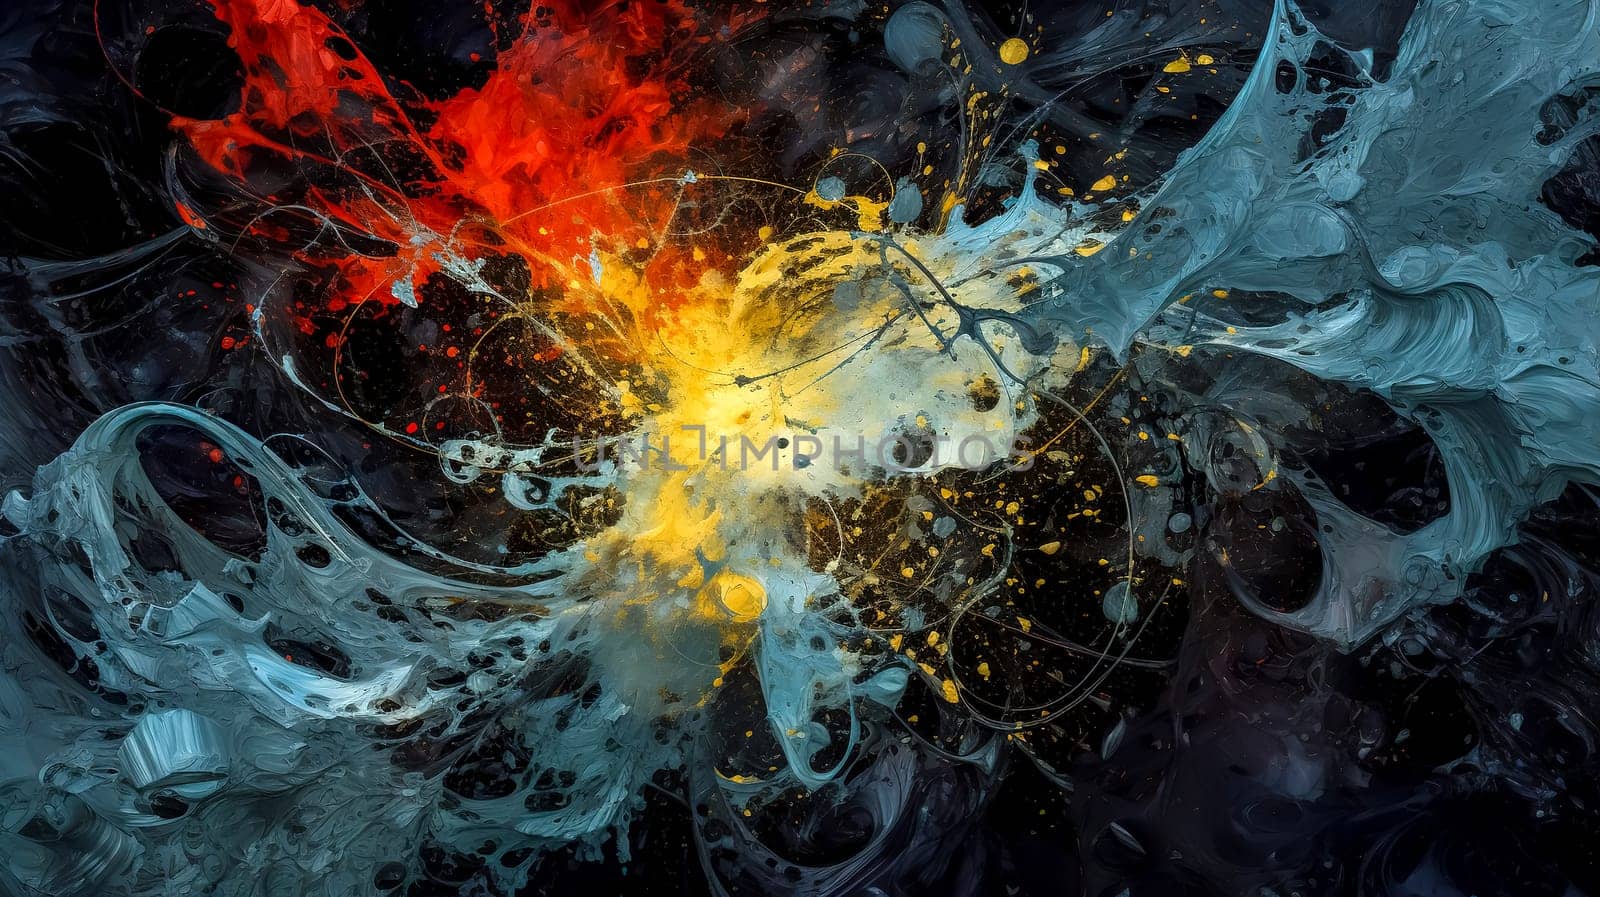 A dynamic abstract explosion of colors, combining elements of fire and ice with fluid forms